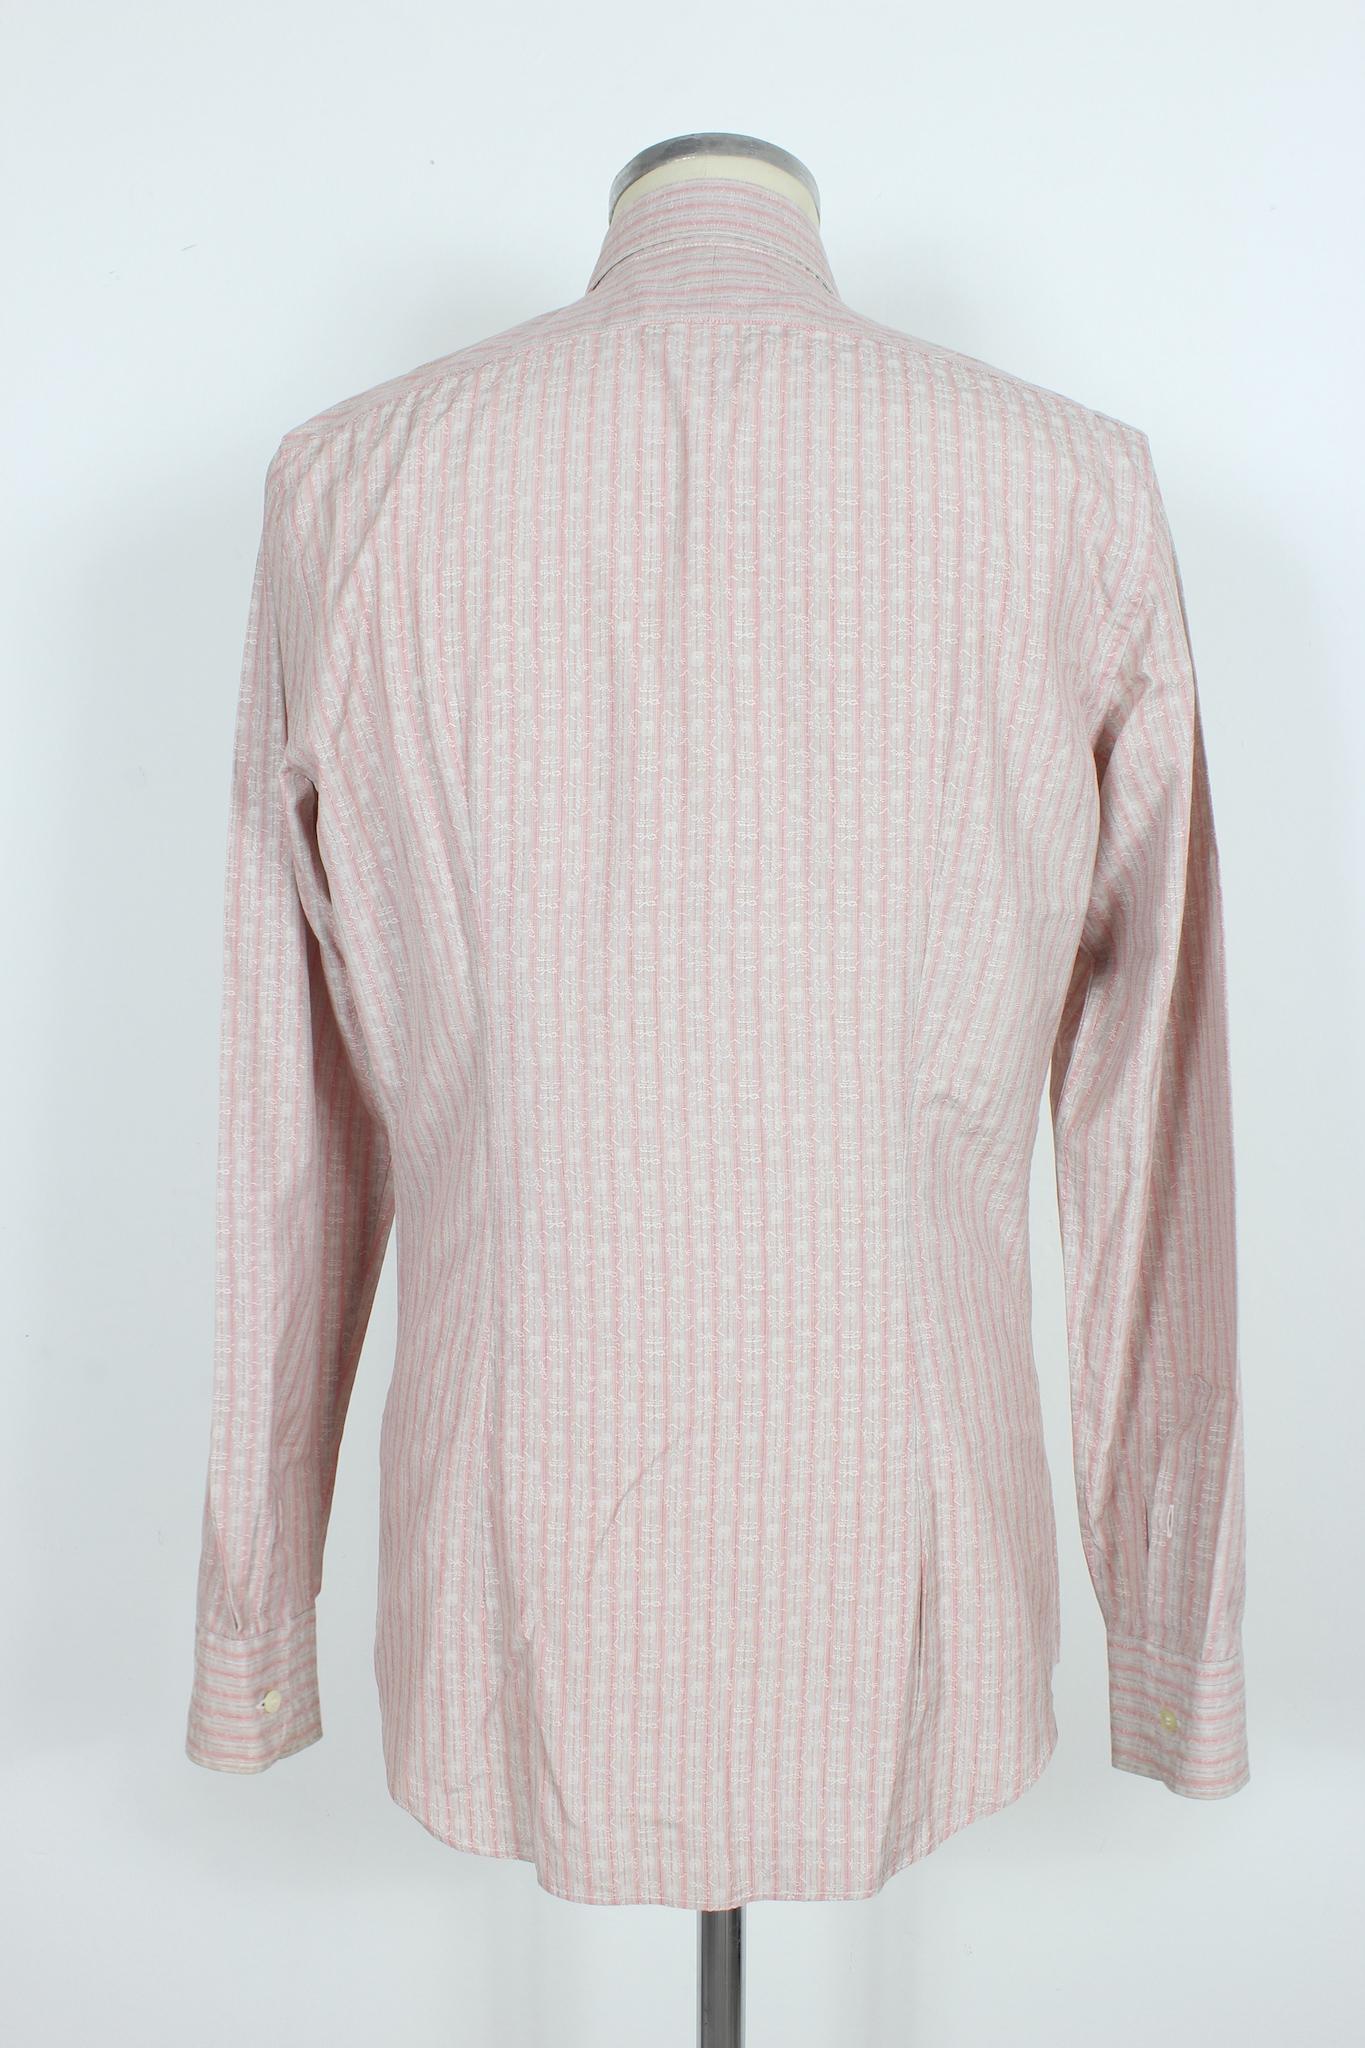 Prada men's shirt vintage 2000s. Pink with gray stripes. Slim fit model, 100% cotton fabric. Made in italy.

Size: 40/15 - M

Shoulder: 48cm
Bust/Chest: 53 cm
Sleeve: 65 cm
Length: 79 cm